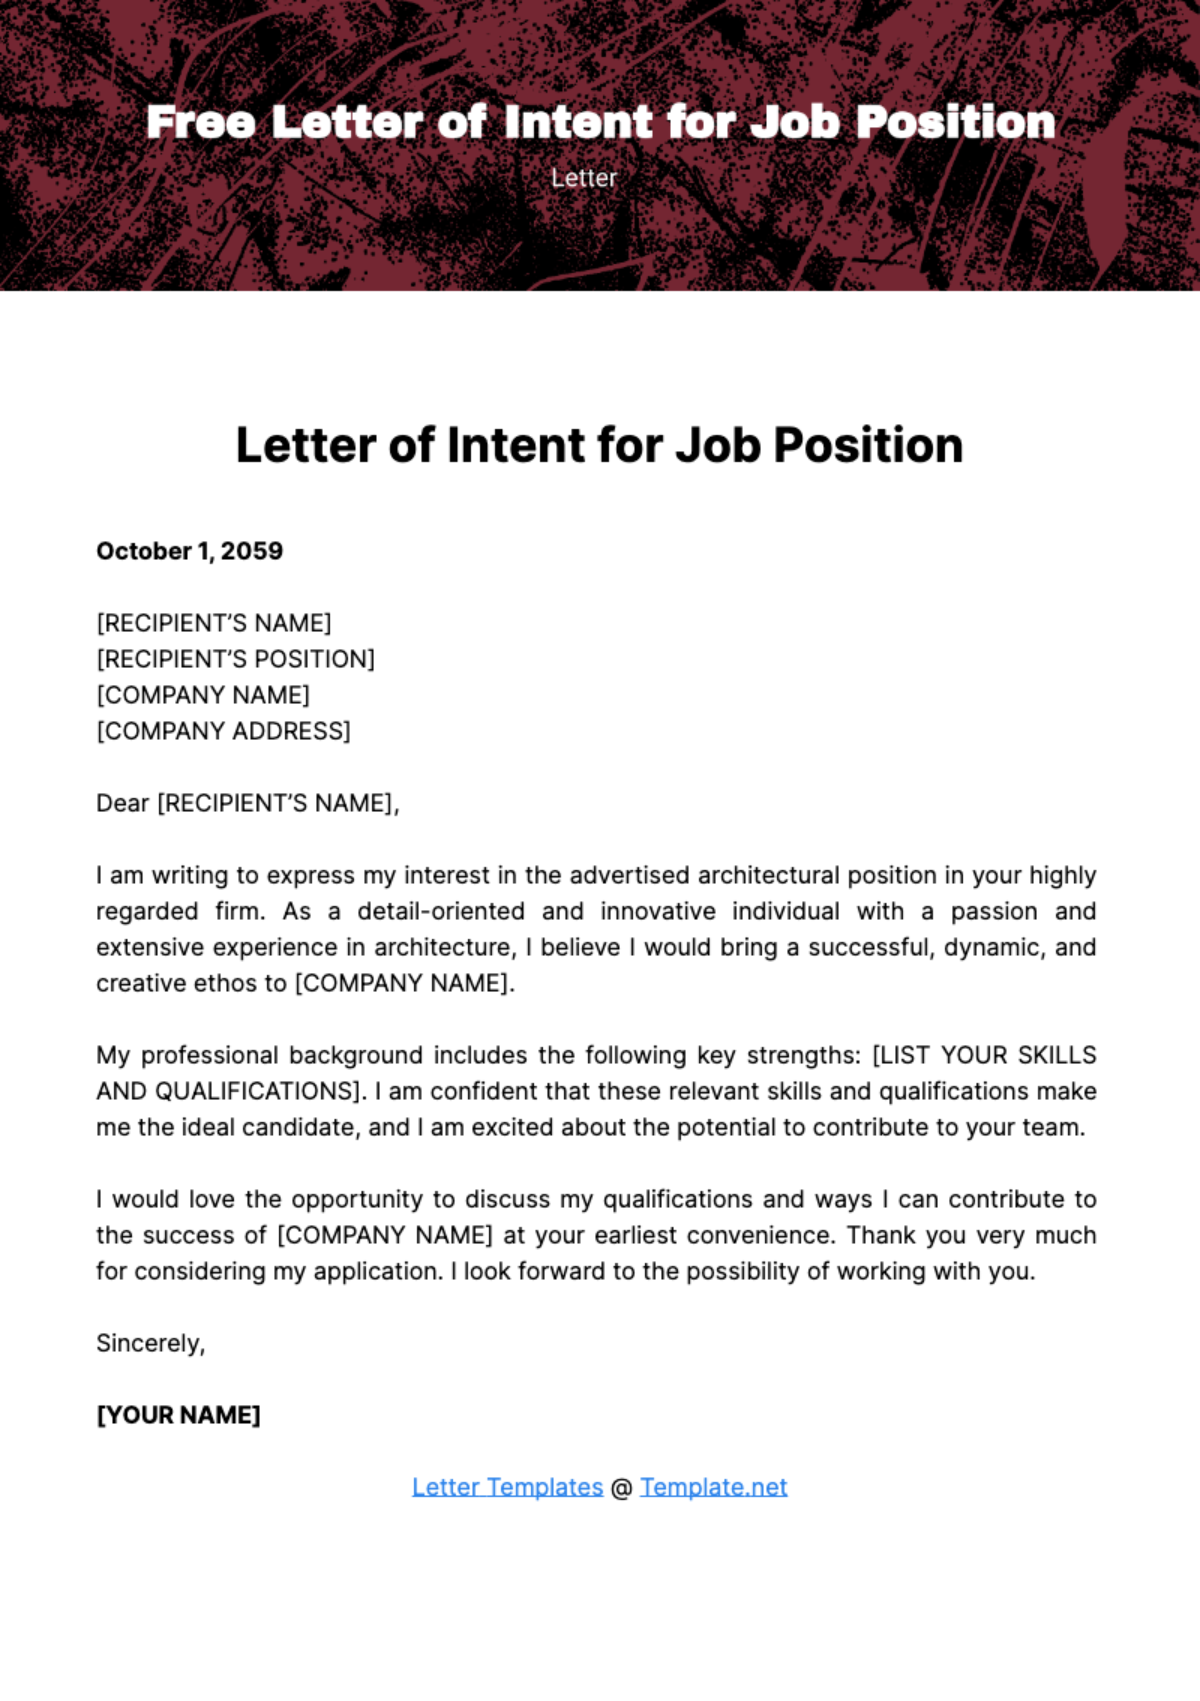 Letter of Intent for Job Position Template